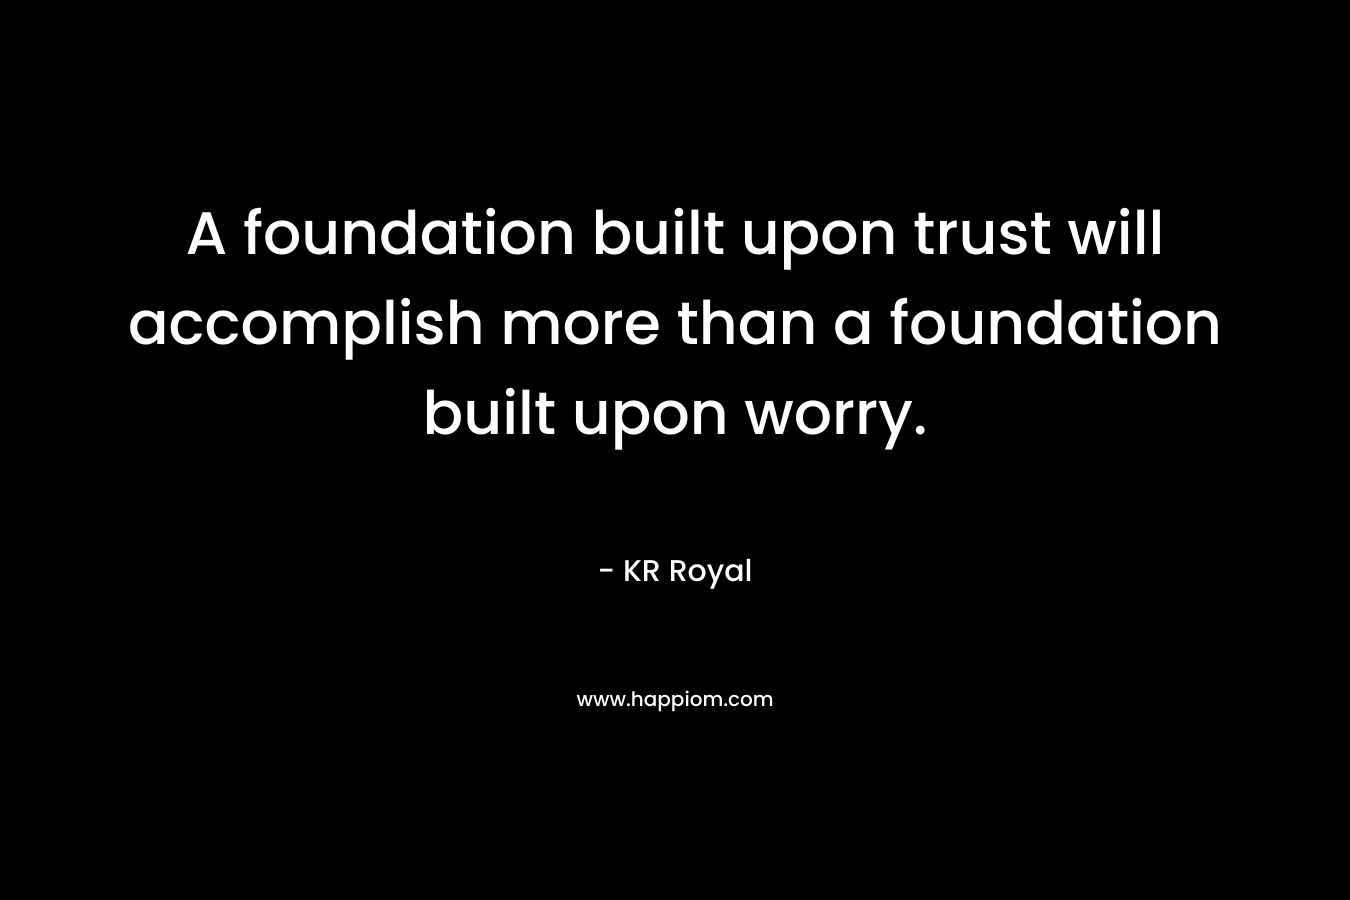 A foundation built upon trust will accomplish more than a foundation built upon worry.